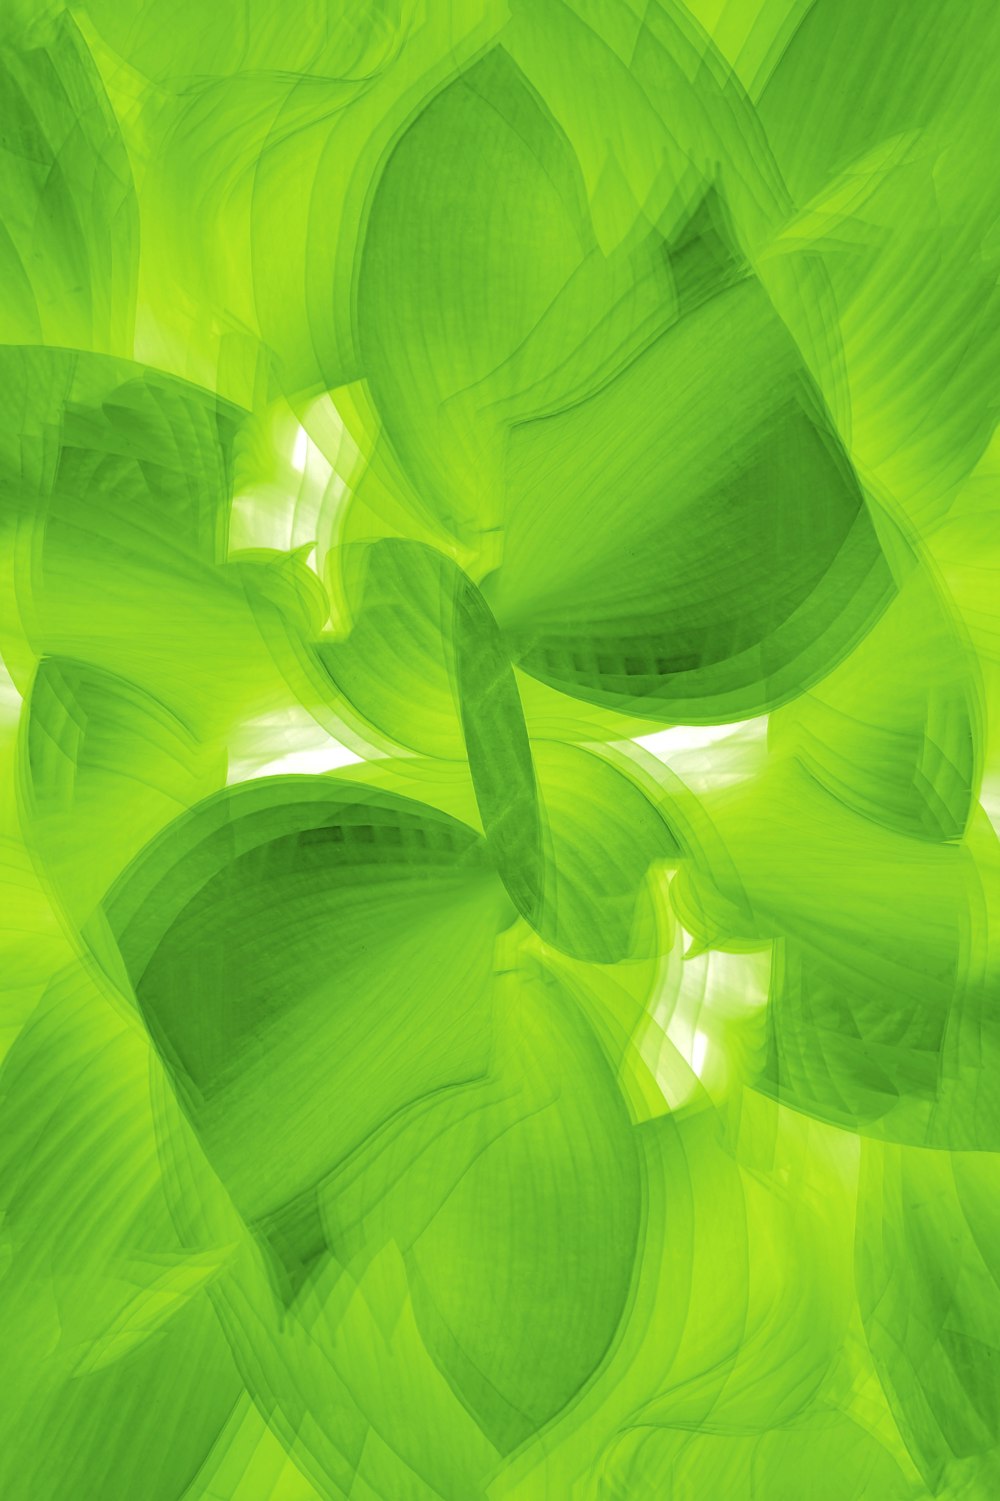 a green abstract background with lots of leaves